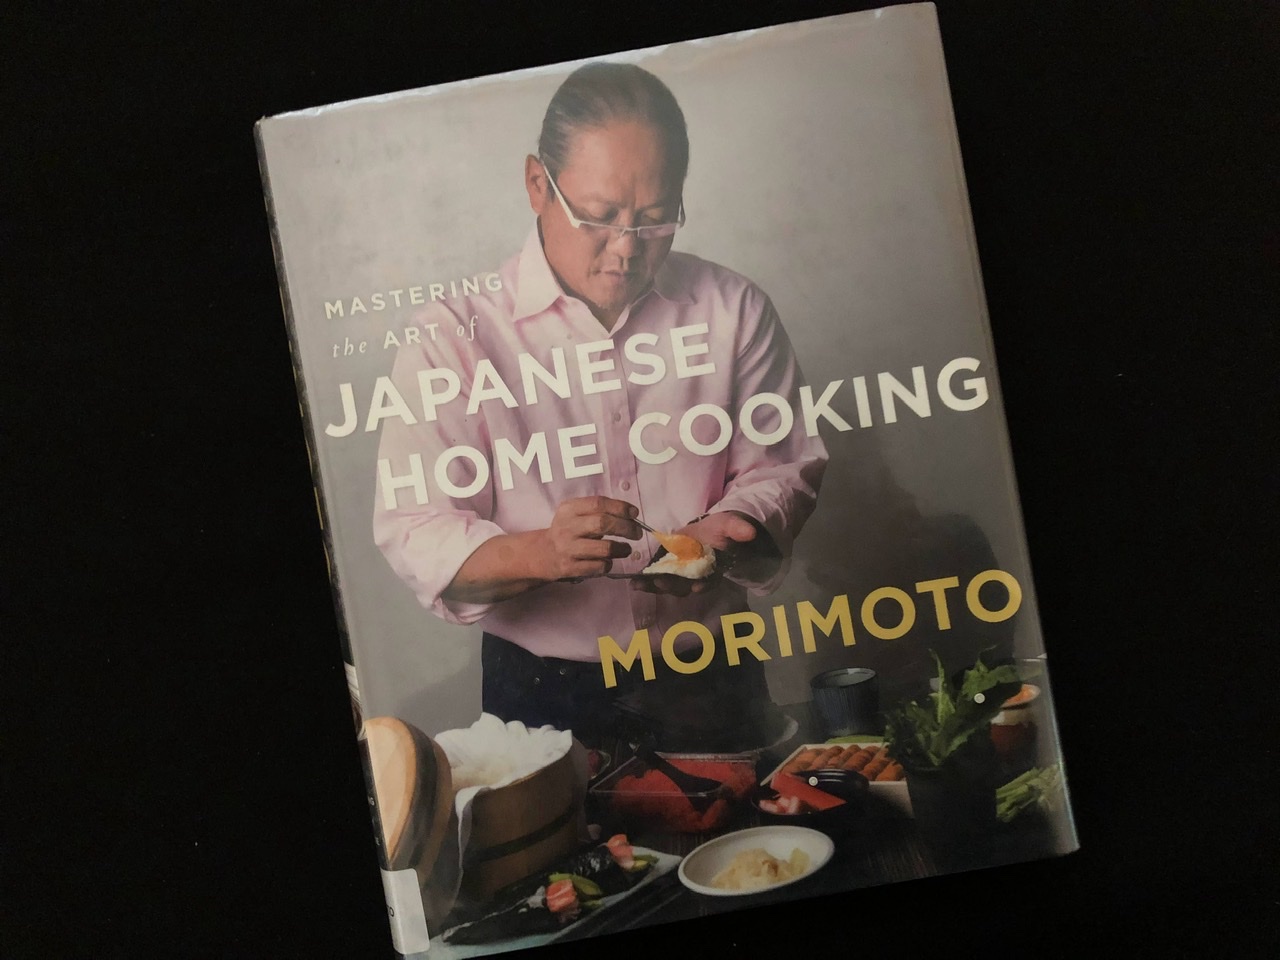 Mastering the Art of Japanese Home Cooking cookbook